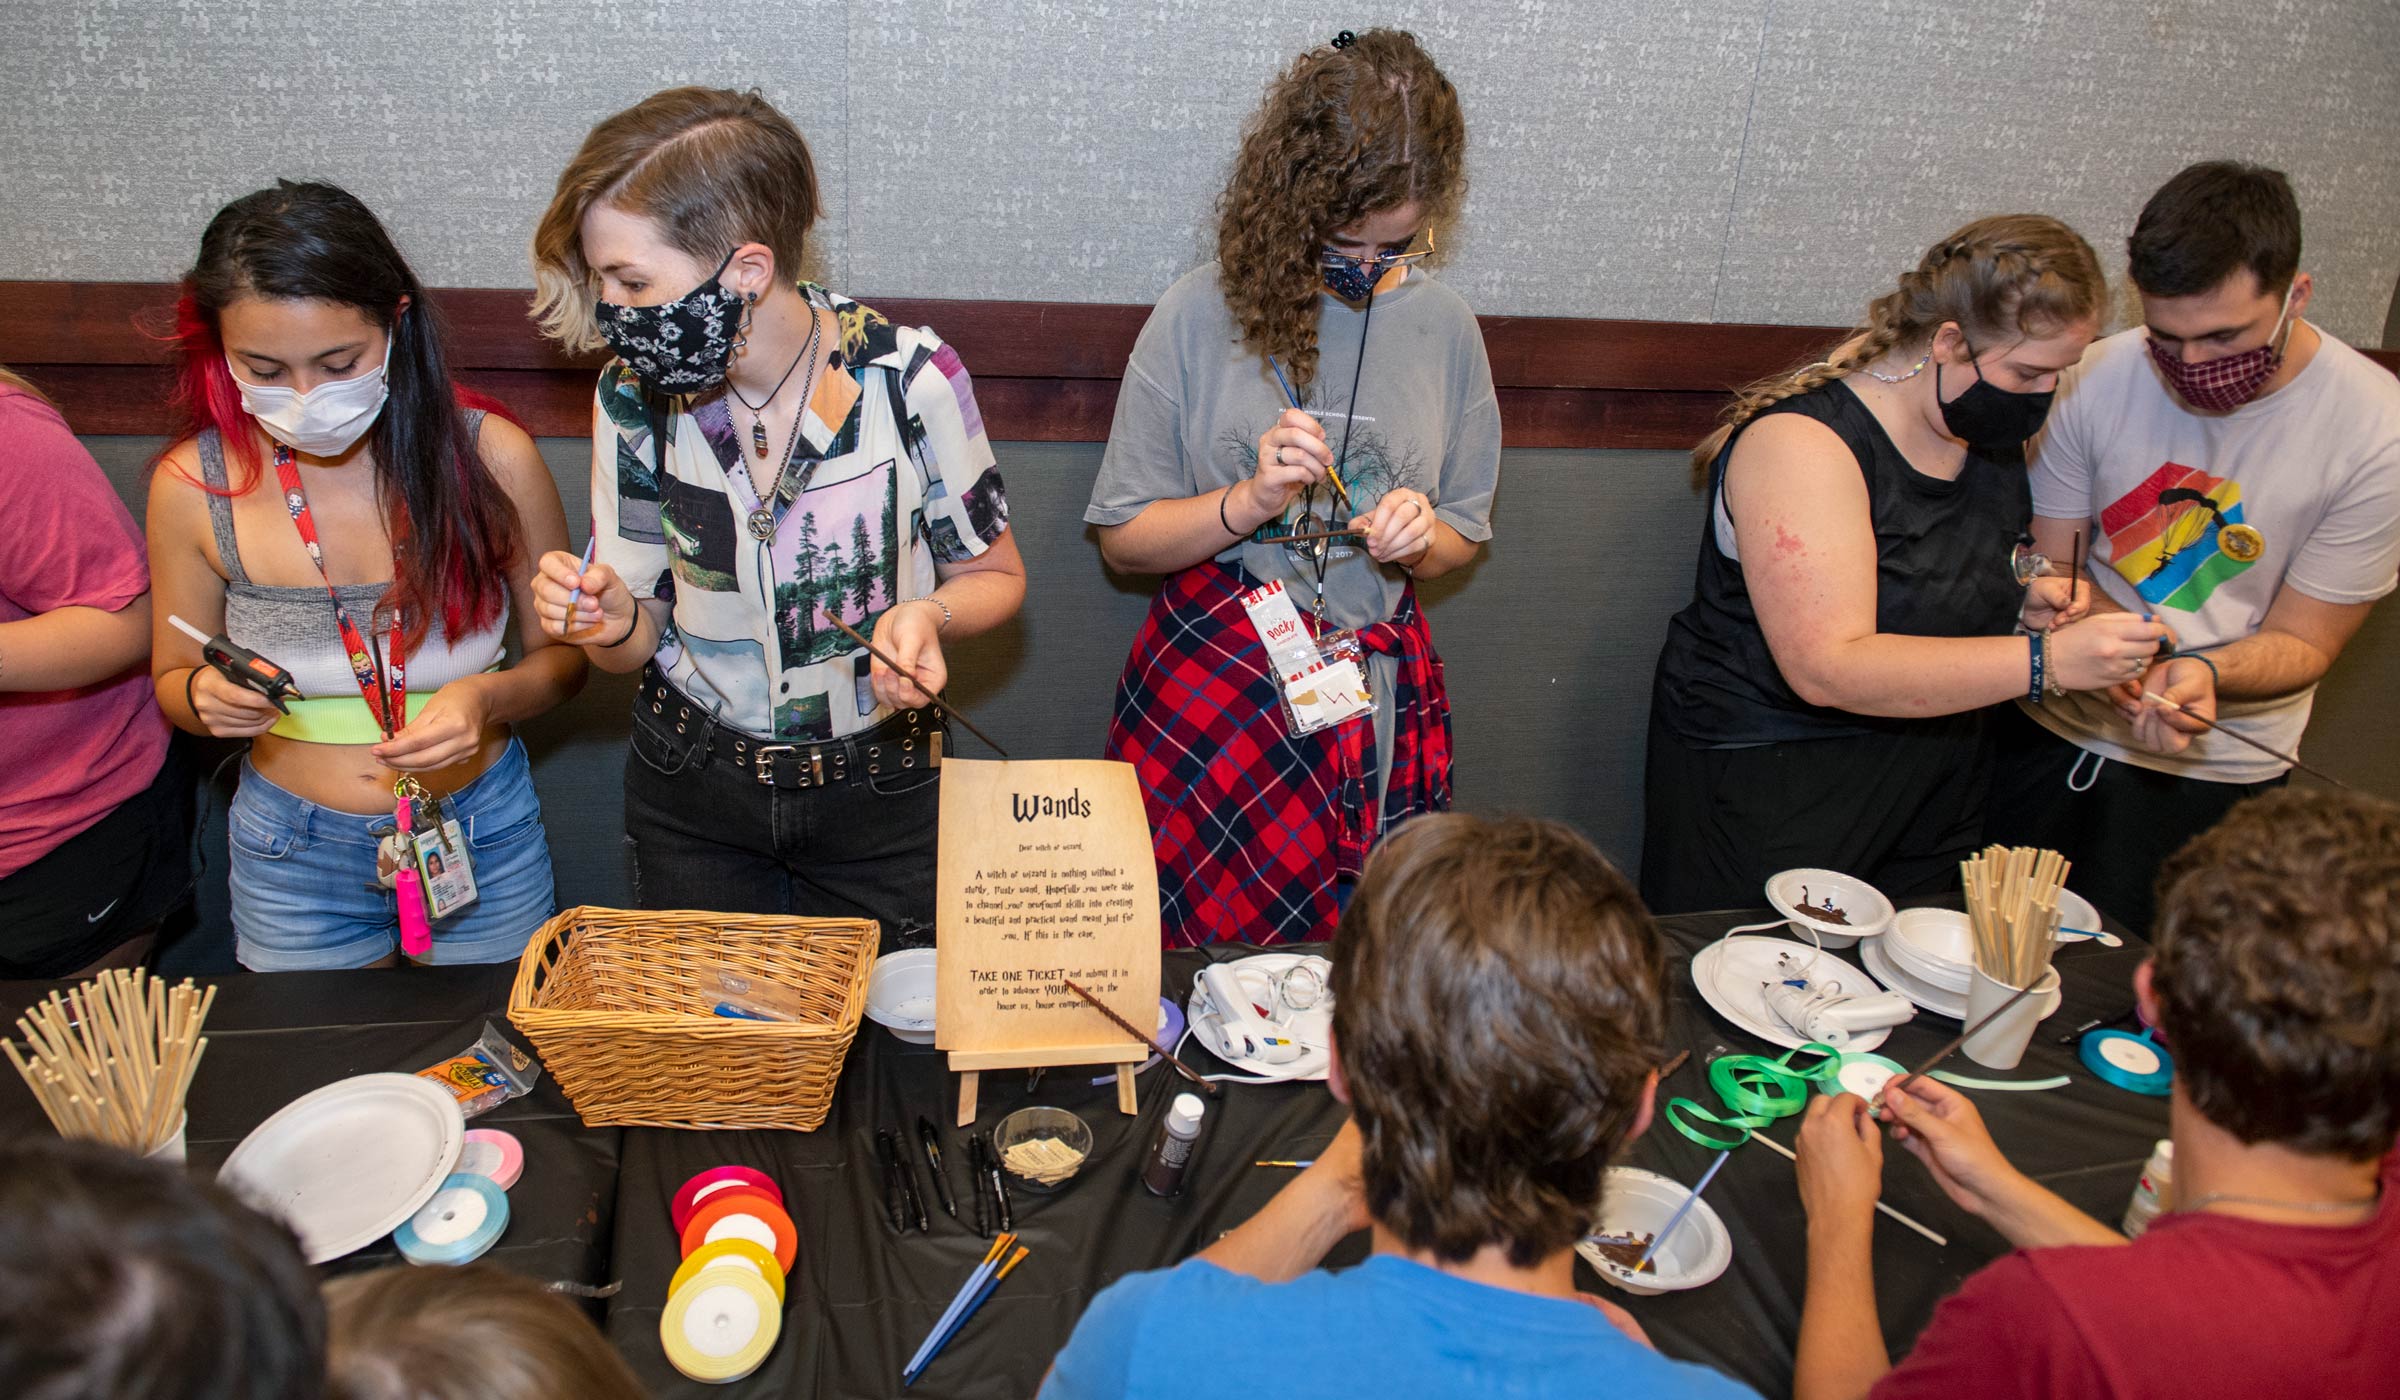 Students (wearing masks as a Covid precaution) work on painting their wands at one of the activity stations in the Hogwarts event in the Union.